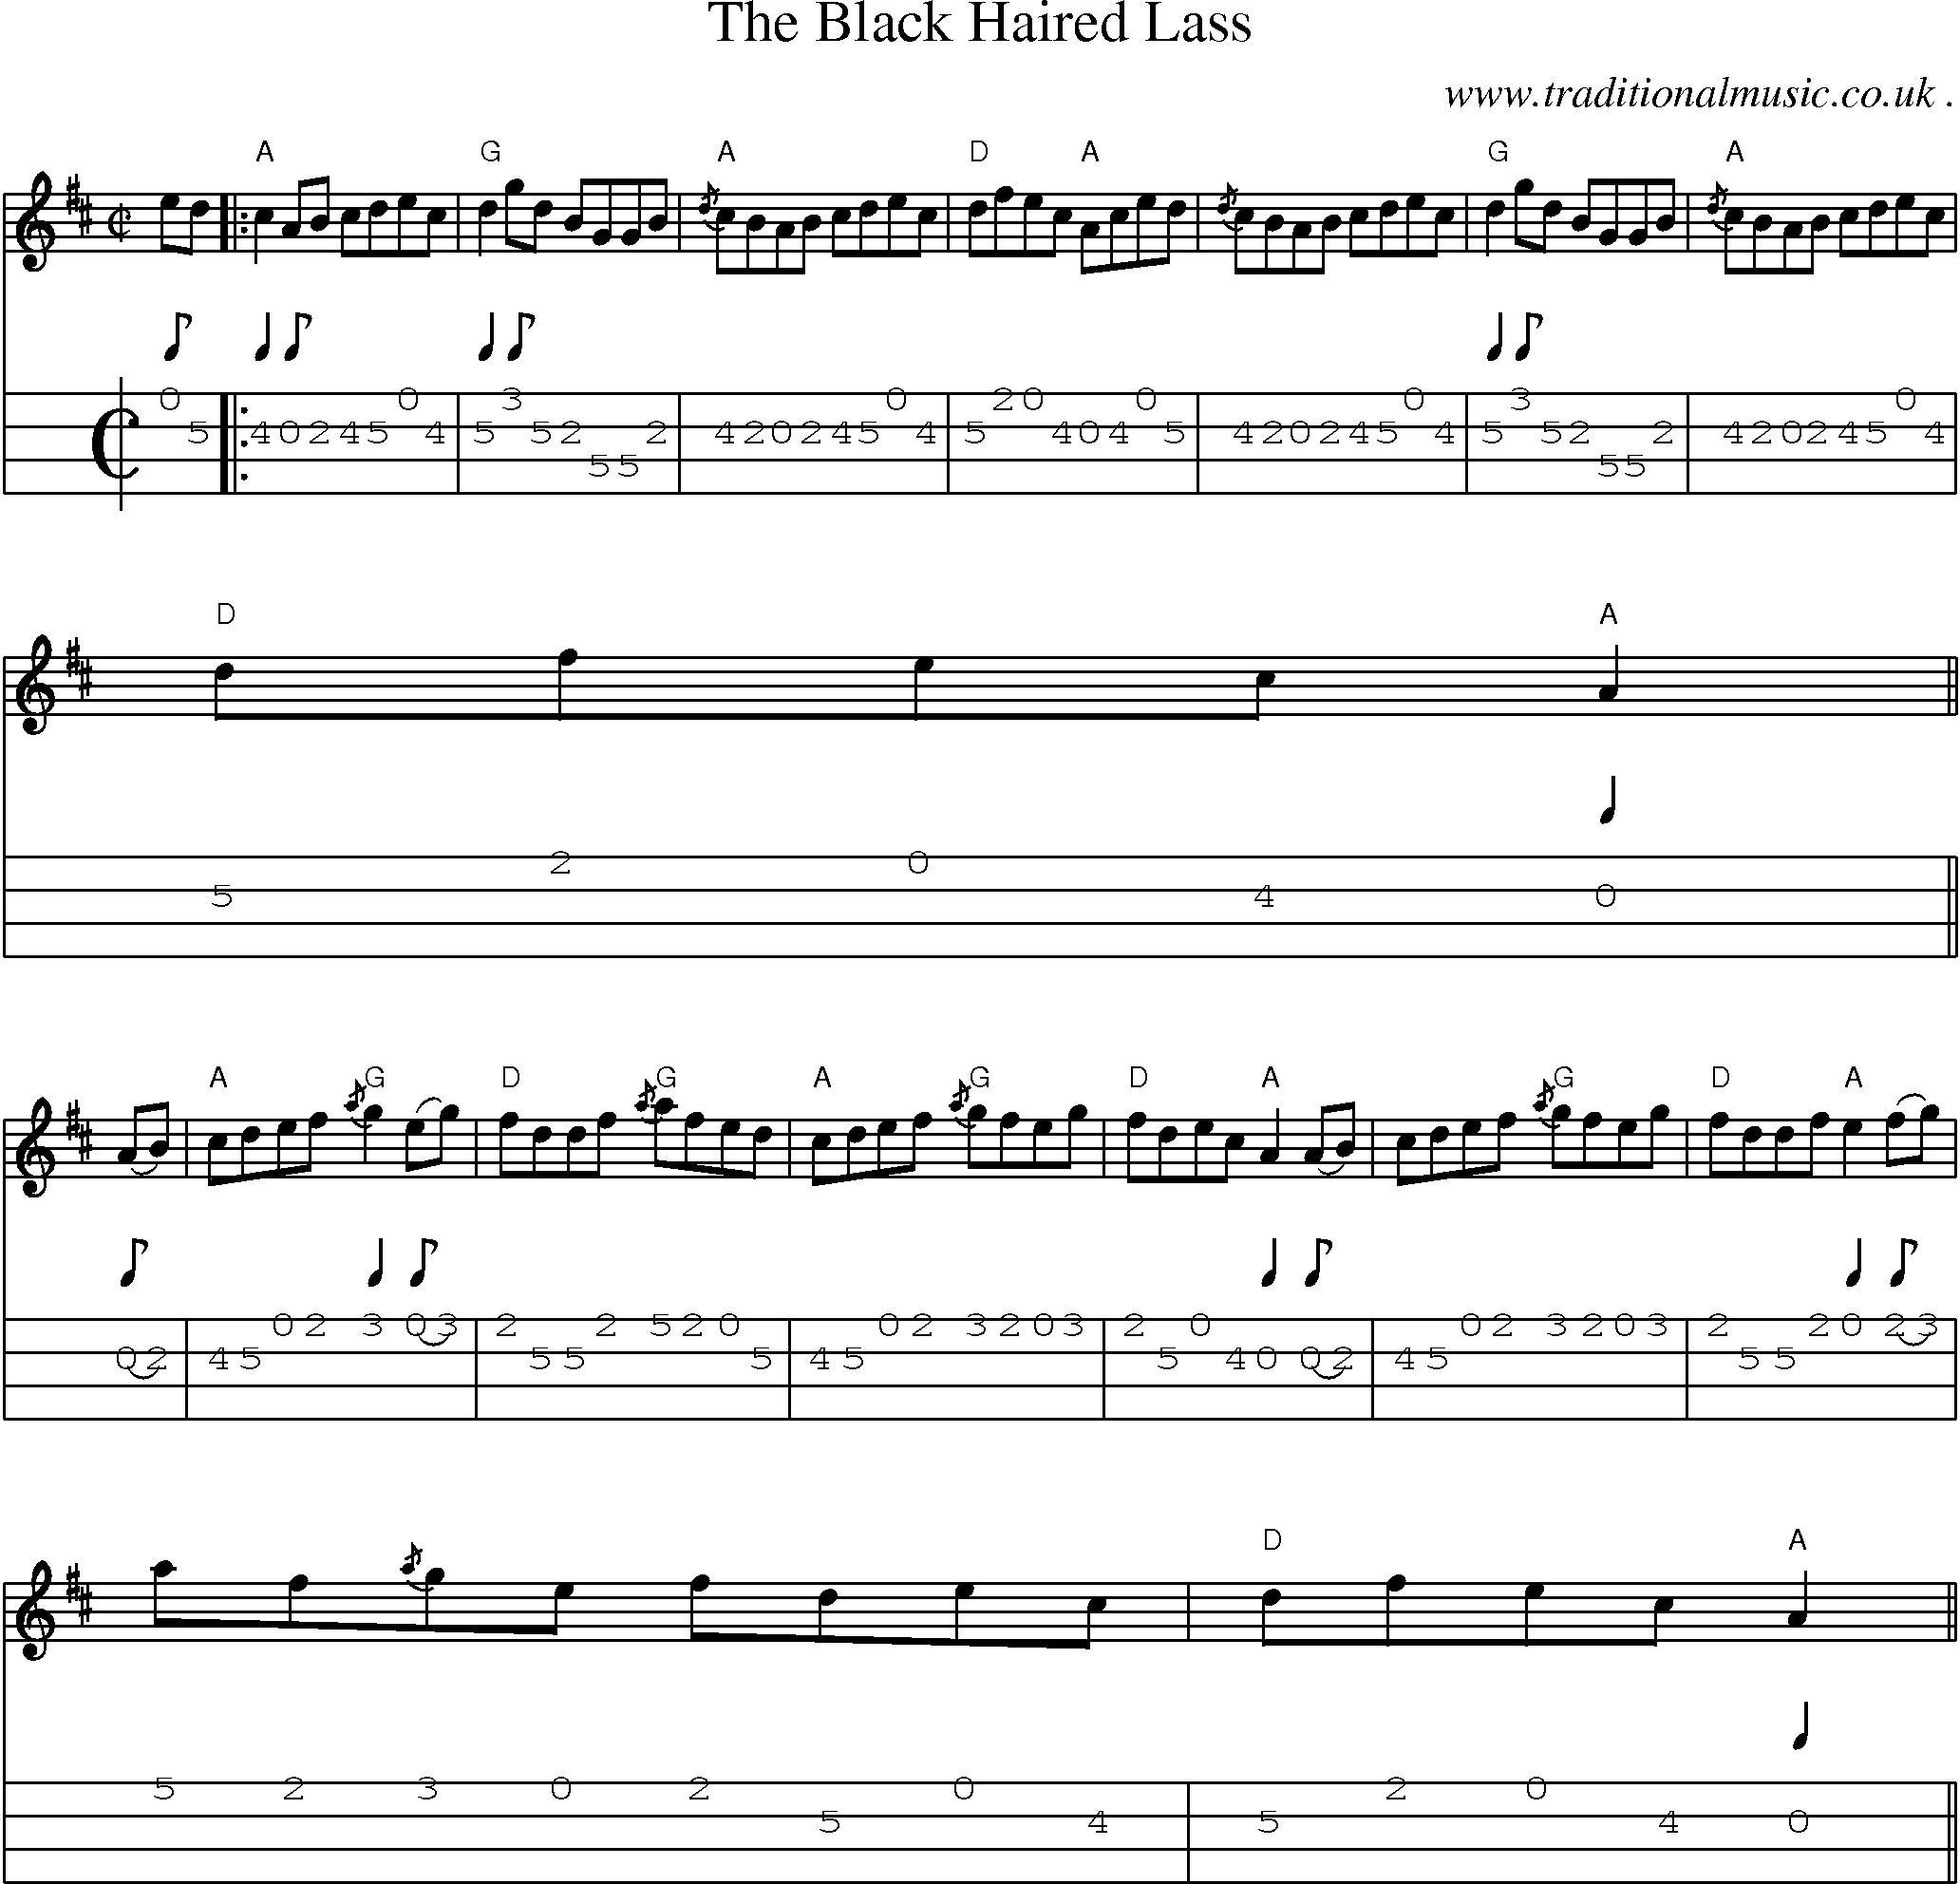 Music Score and Guitar Tabs for The Black Haired Lass